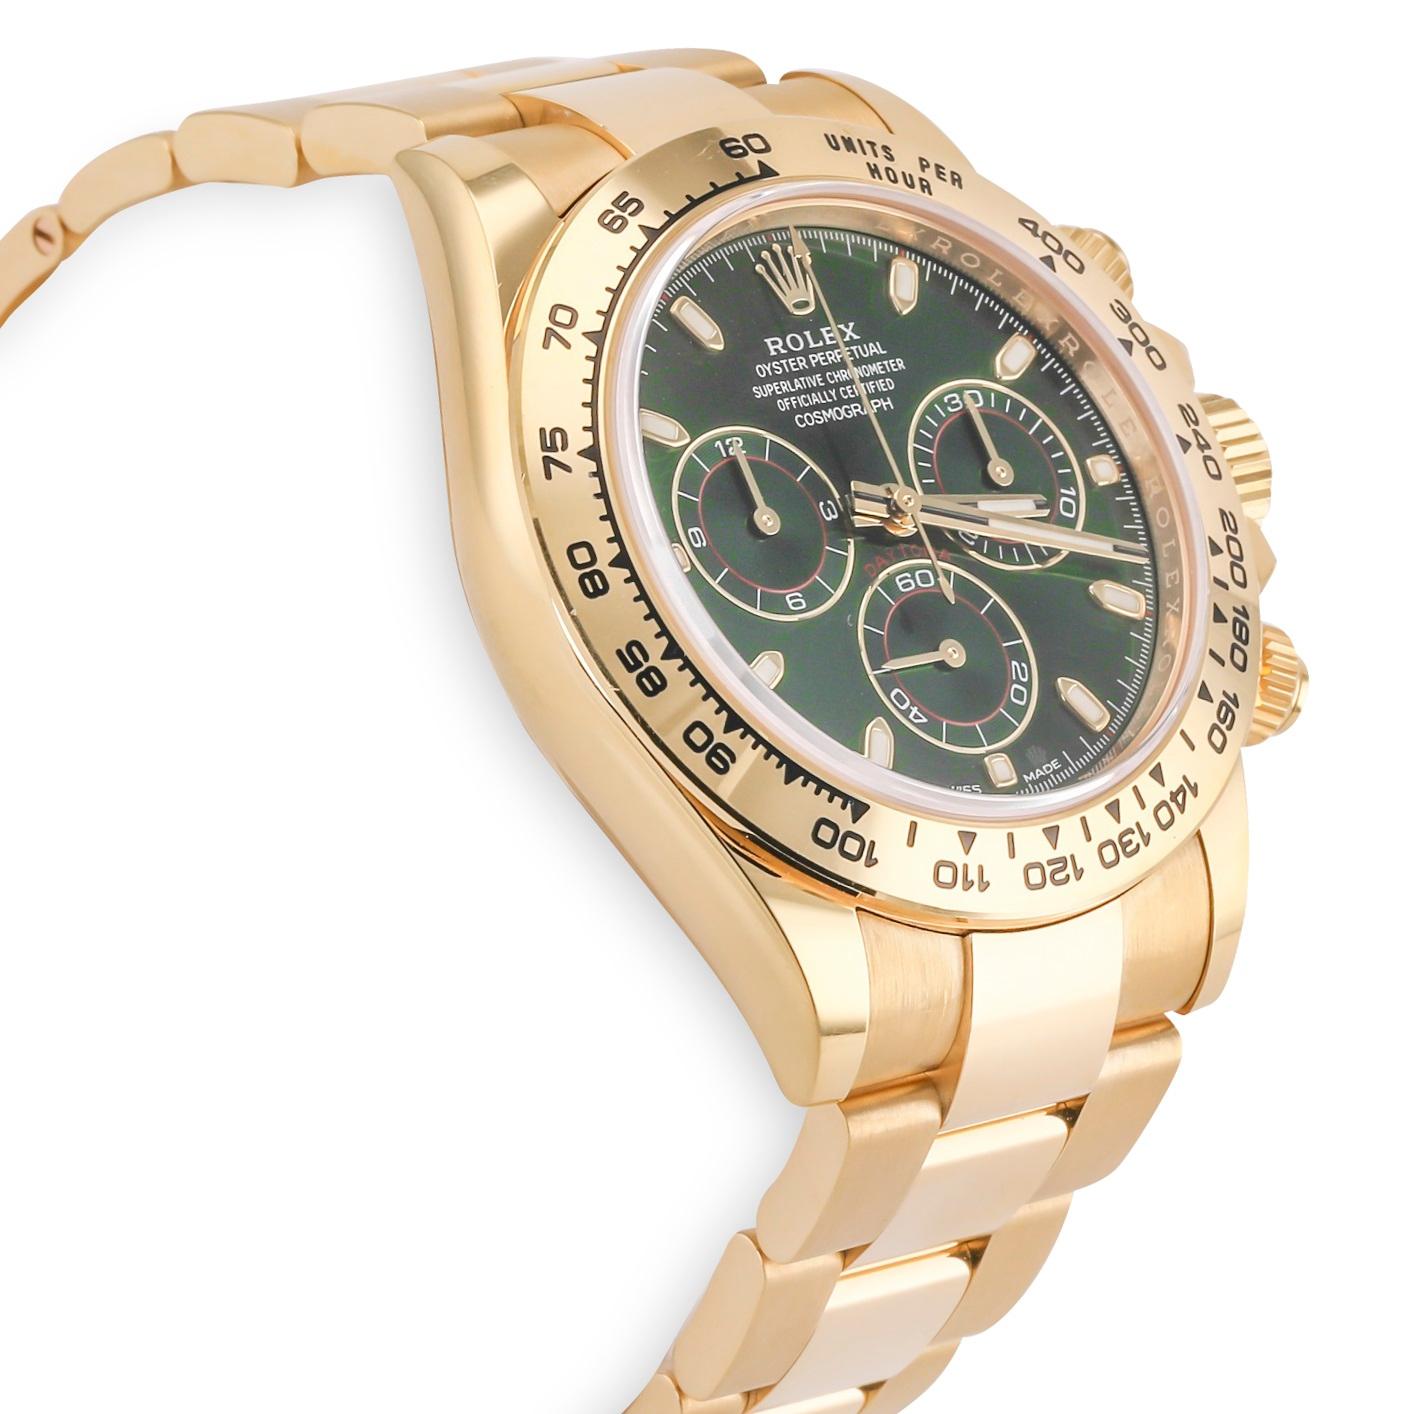 Rolex Daytona Yellow Gold (116508)
18K Yellow Gold Case & bezel
Reference Number:  116508
Self-winding mechanical chronograph movement, Calibre 4130
Scratch resistant sapphire crystal
Dial: Green
Functions:  Chronograph, center hour, minute and